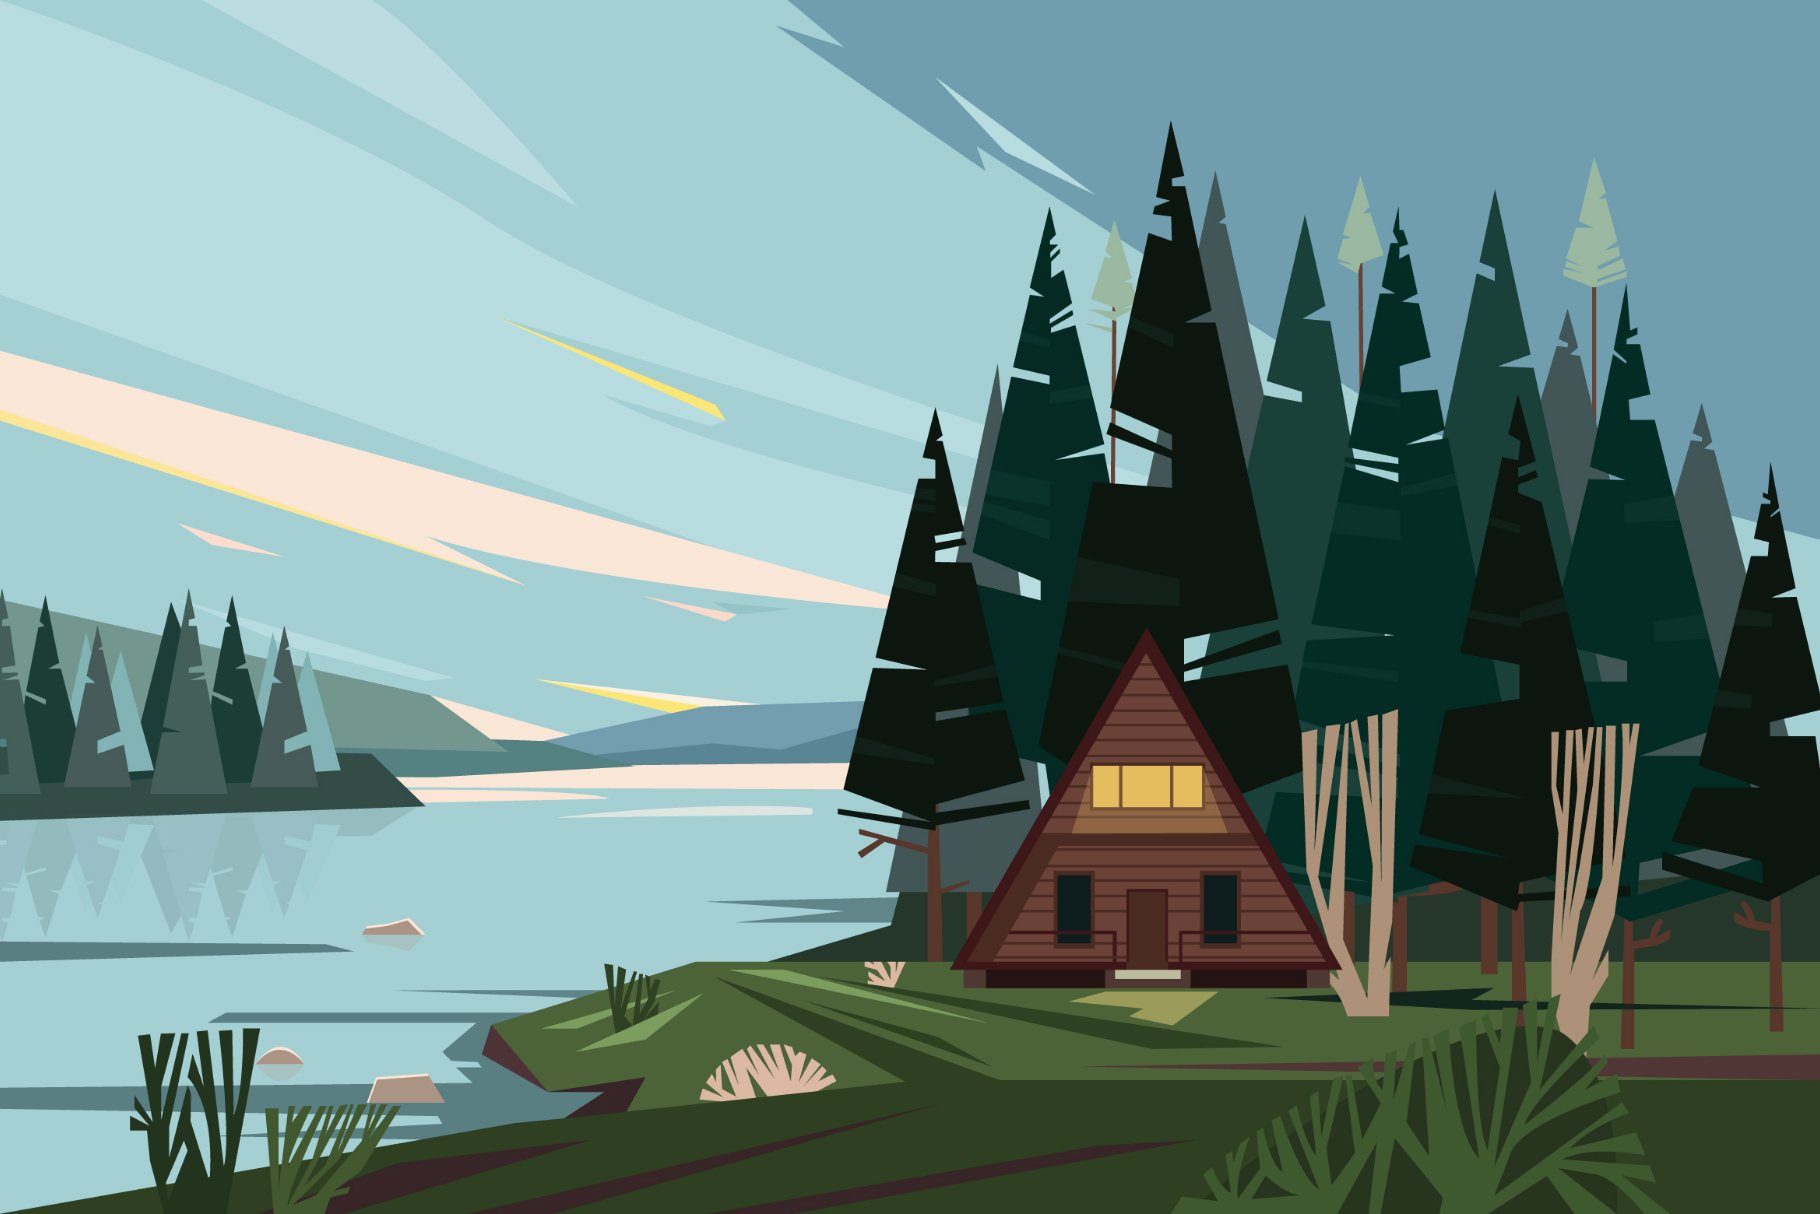 Cabin in the Woods - Illustration cover image.